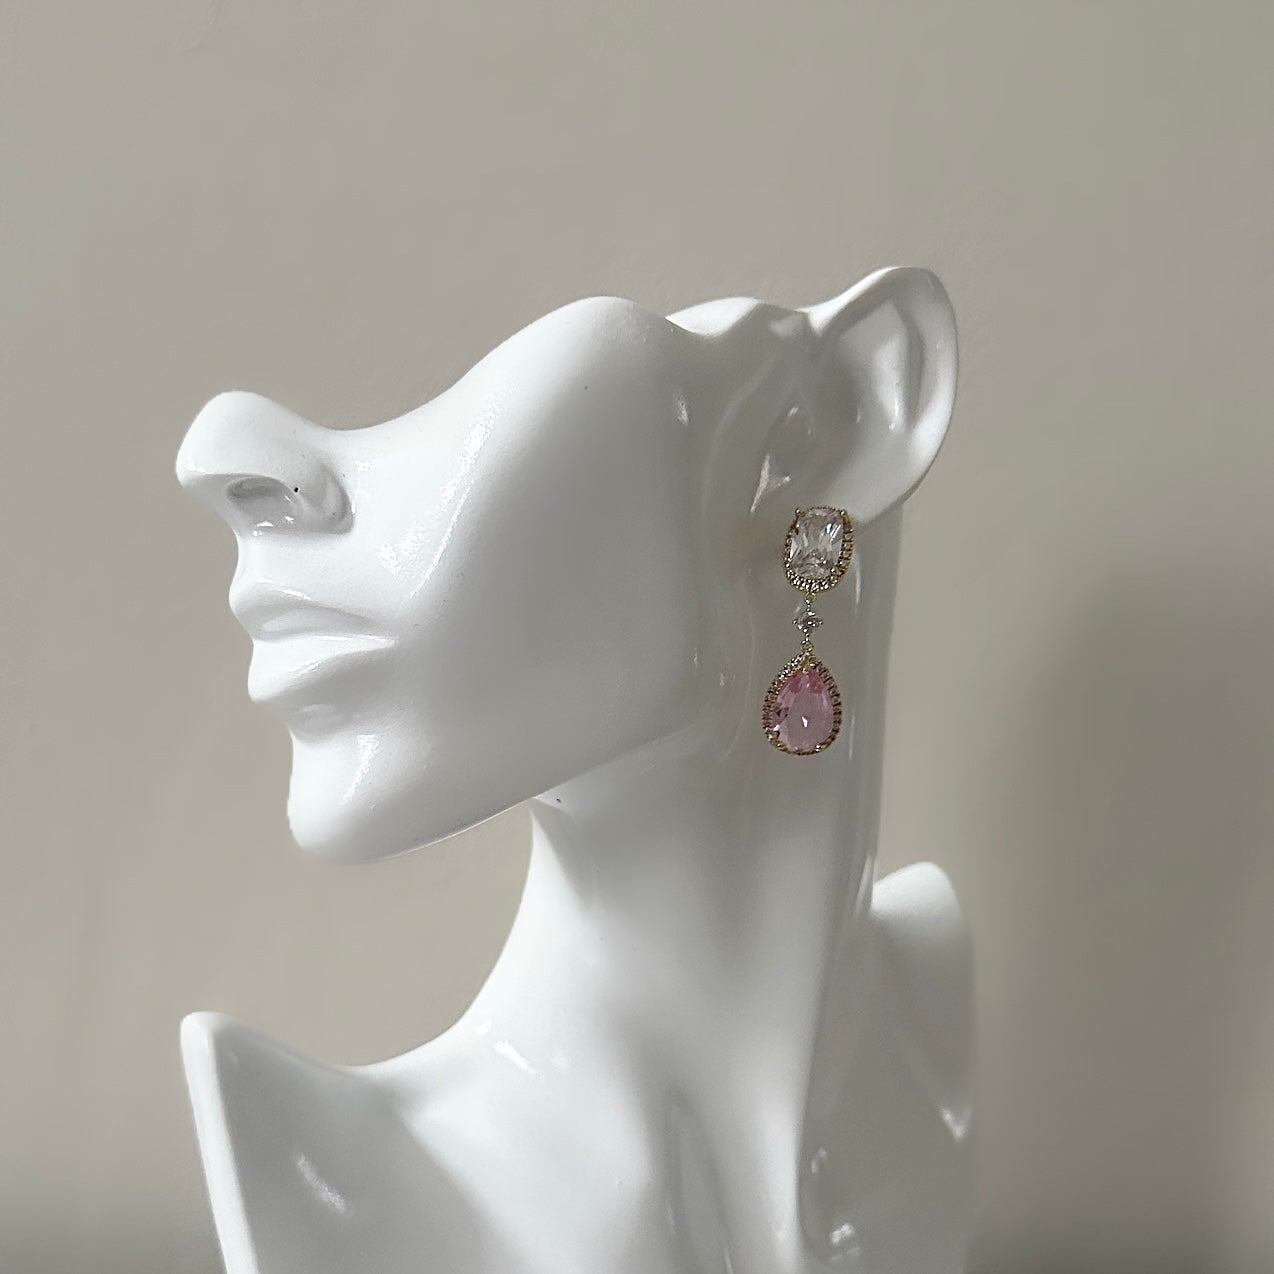 These sparkling Pink Crystal  Earrings, crafted with cz crystals, will add a touch of elegance and sparkle to any ensemble. The exquisite drop earring design and dazzling cubic zirconia crystals will make you shine. Elevate your style and make a stunning statement with these beautiful earrings. Available in a silver & gold finish. Earring drop 4.2cm